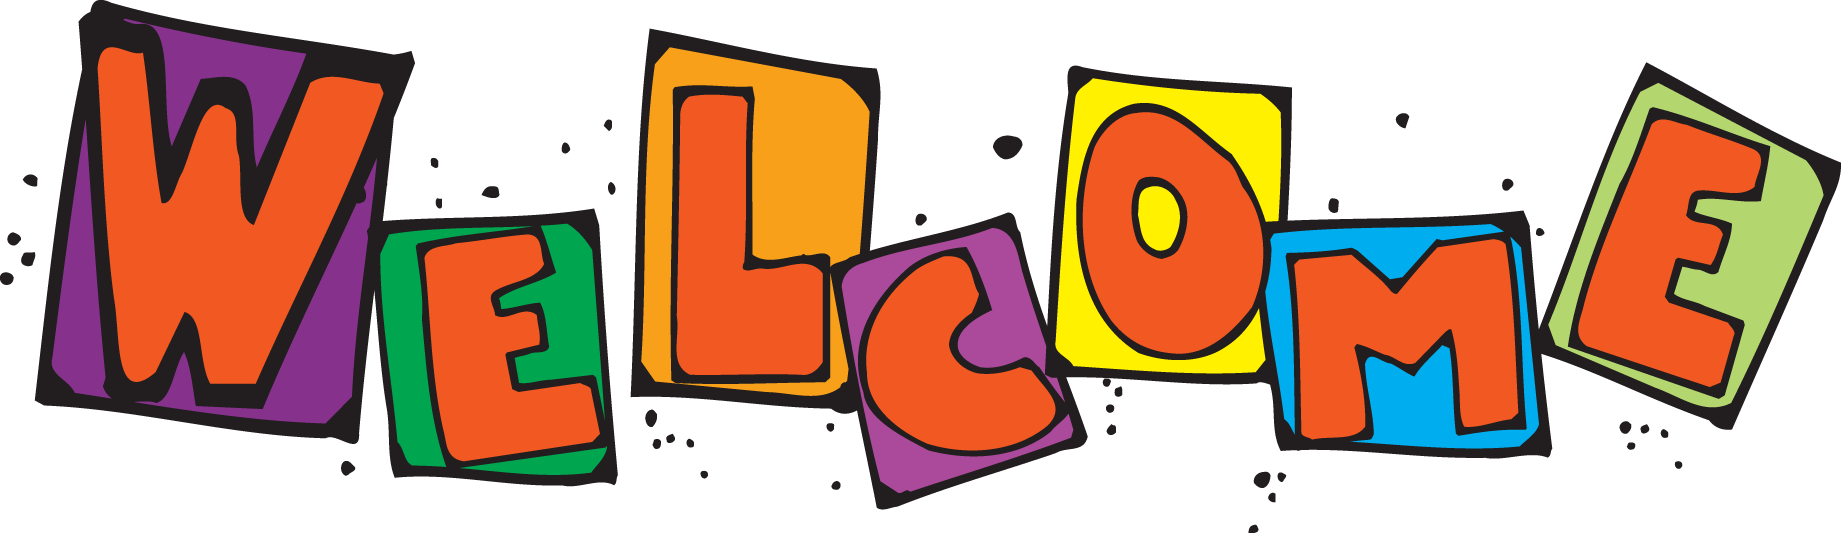 Blog archives we just. September clipart welcome